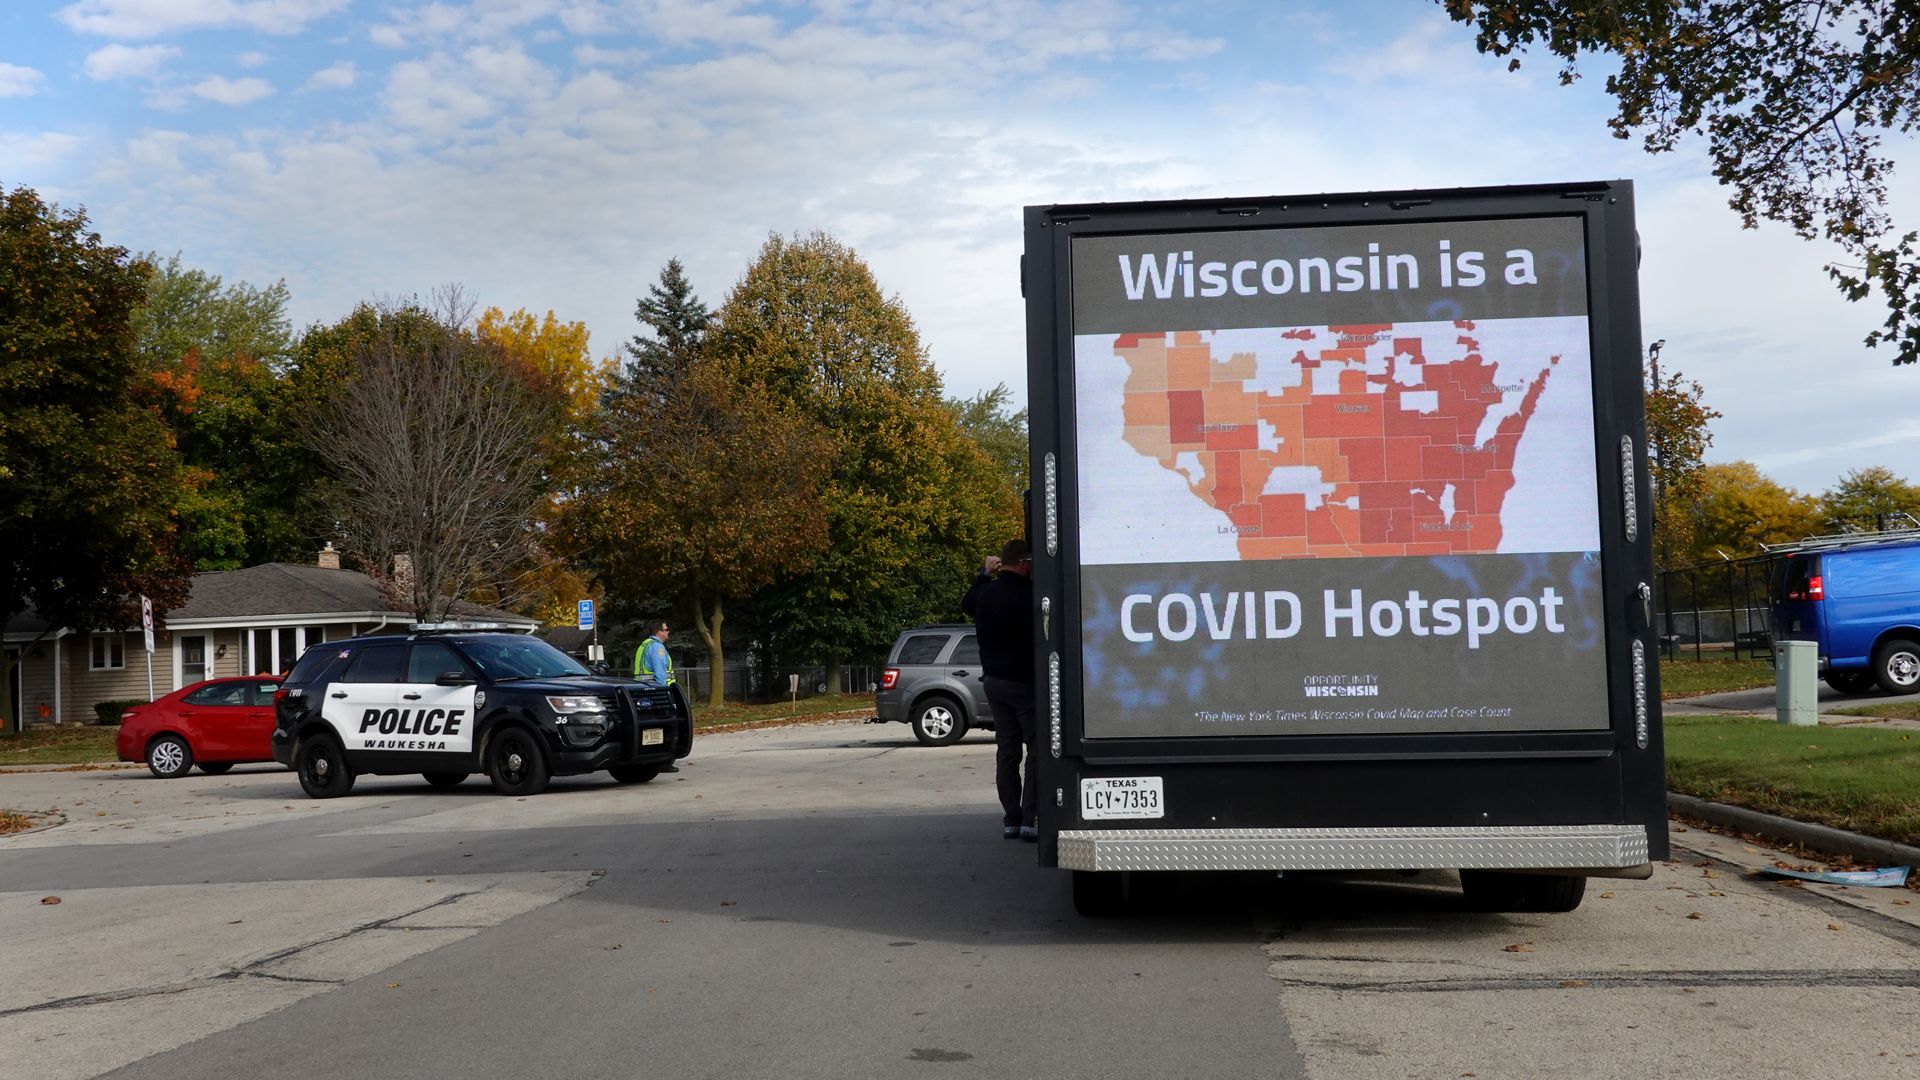 Wisconsin is a COVID hotspot sign